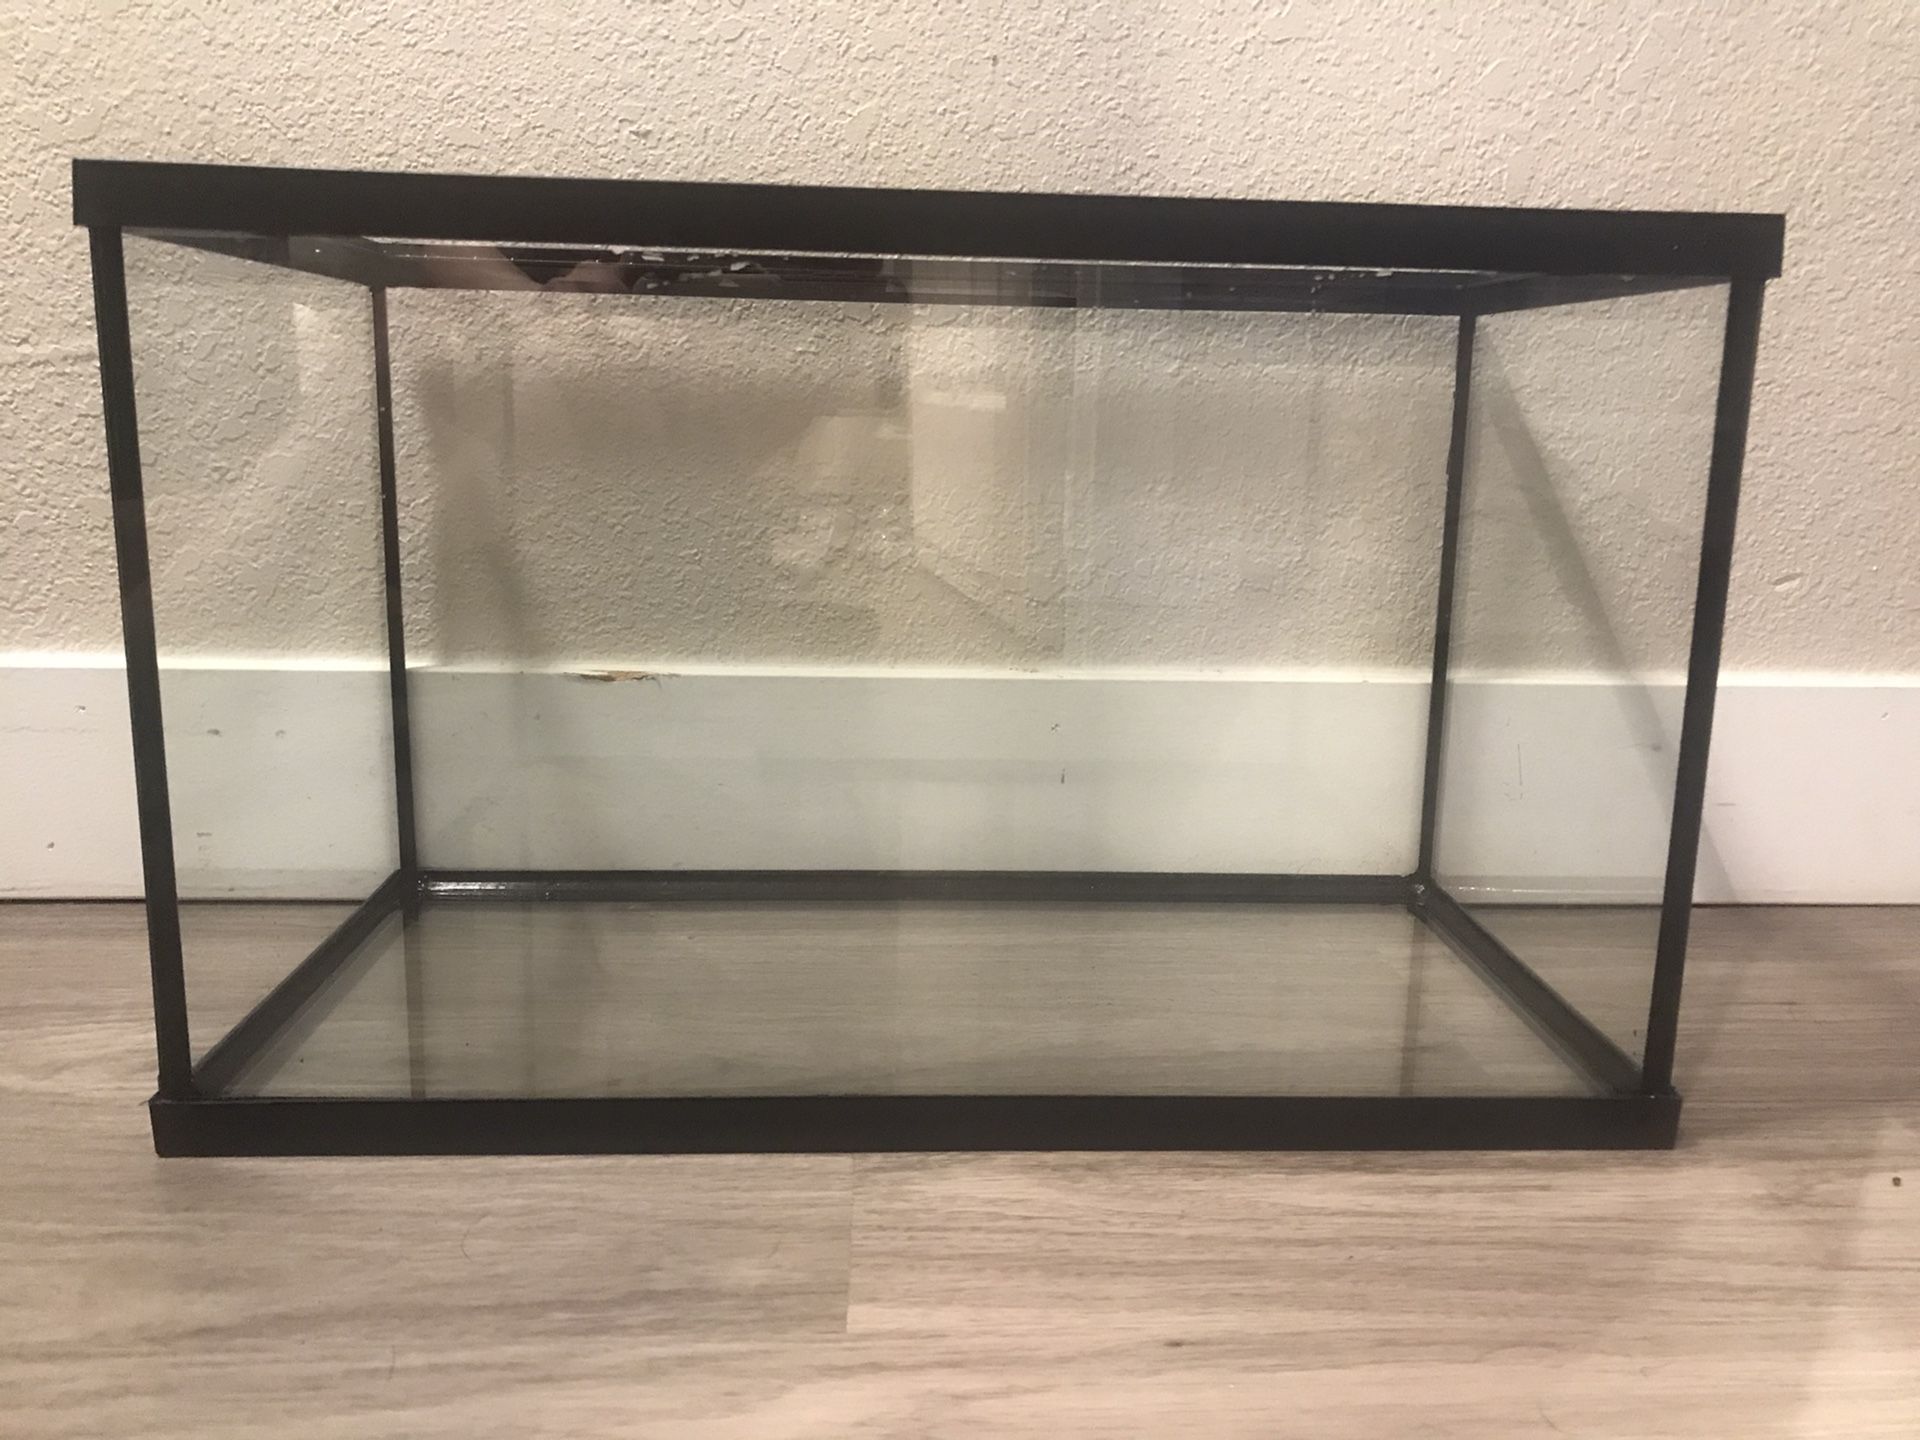 10 Gallon Tank With Lid 